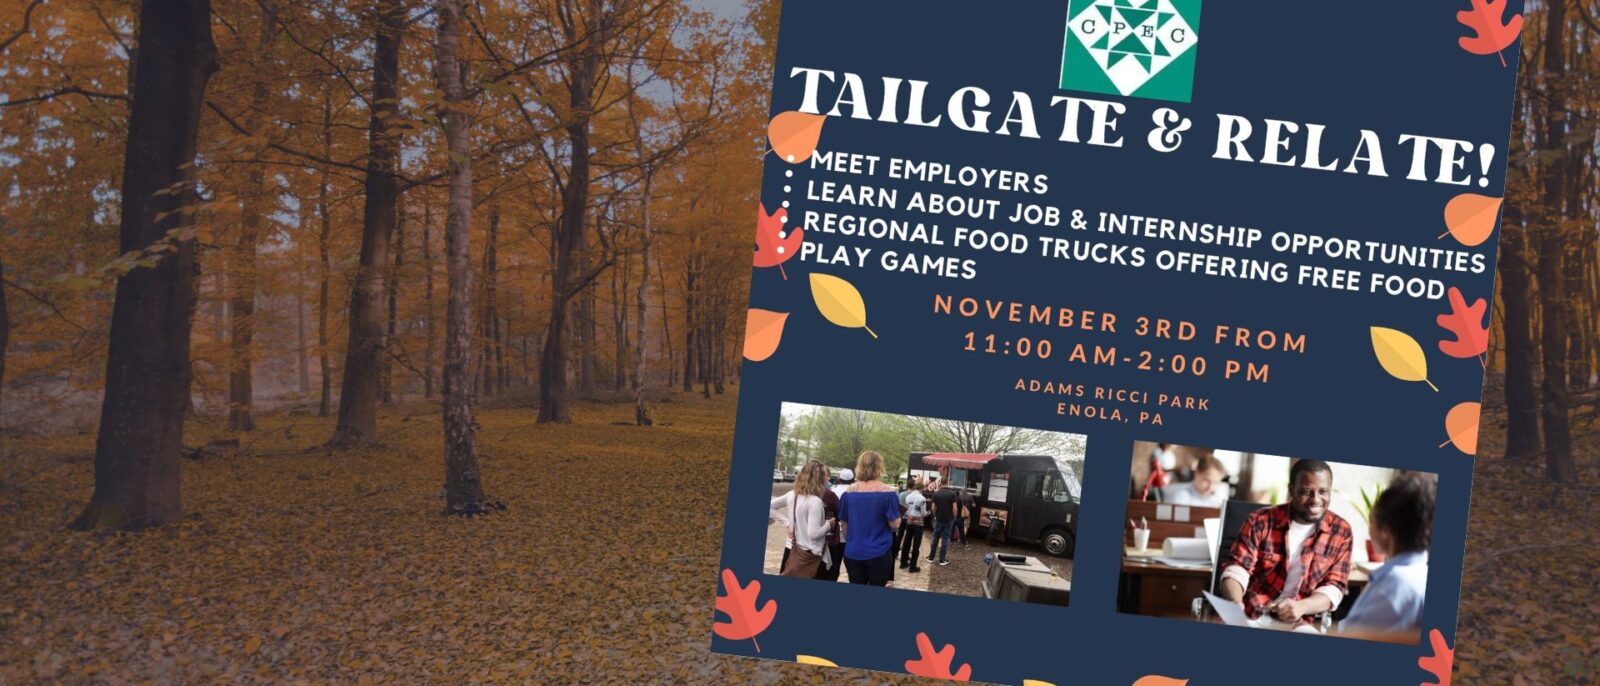 Tailgate & Relate career and networking event